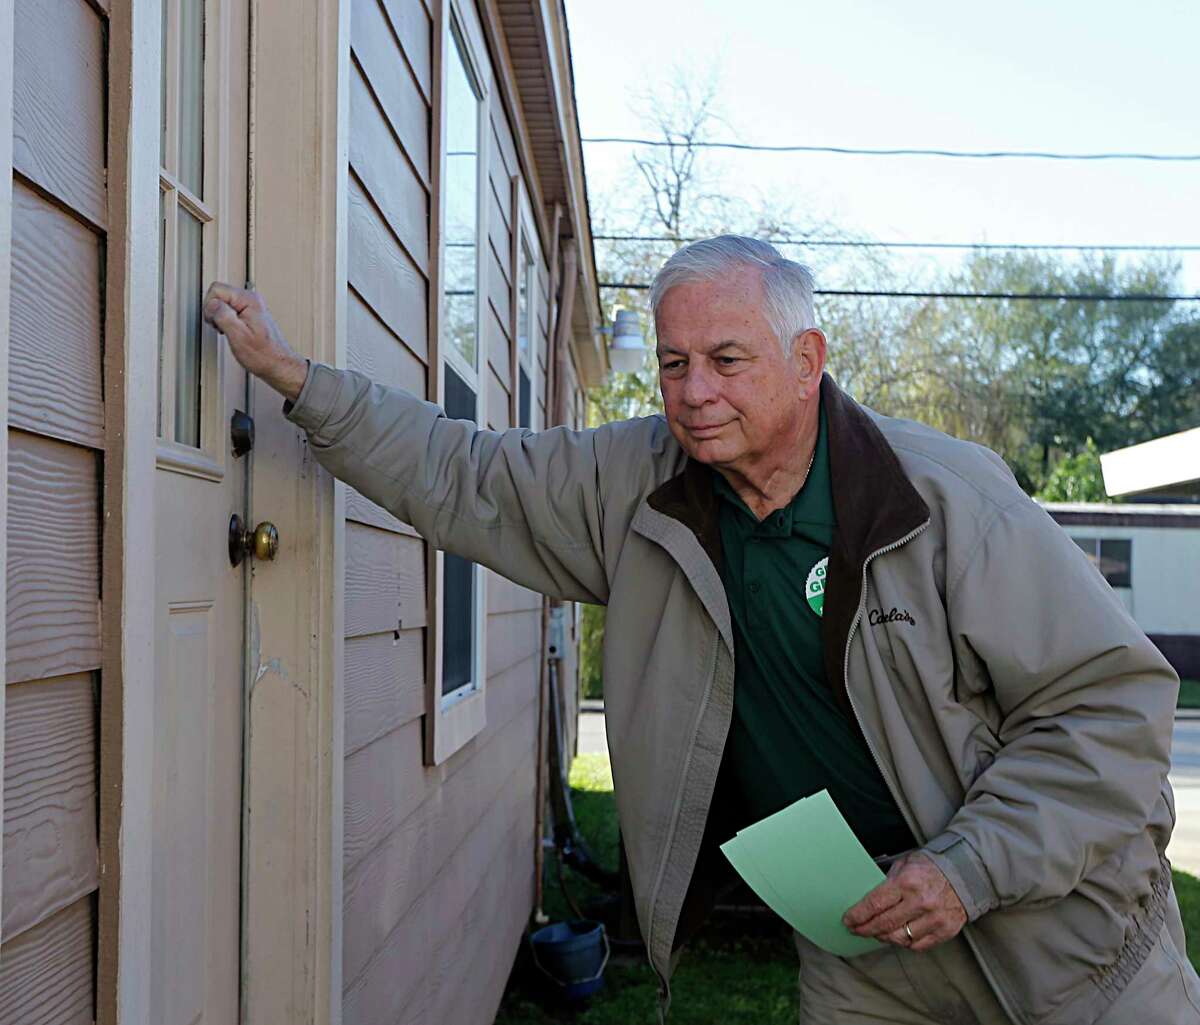 U.S. Rep﻿. Gene Green, left, was drawn out of his district in the controversial redistricting plan of 2003﻿, when he found himself suddenly placed in the looping district belonging to U.S. Rep Ted Poe, right. Green decided to sell his house and move. ﻿﻿